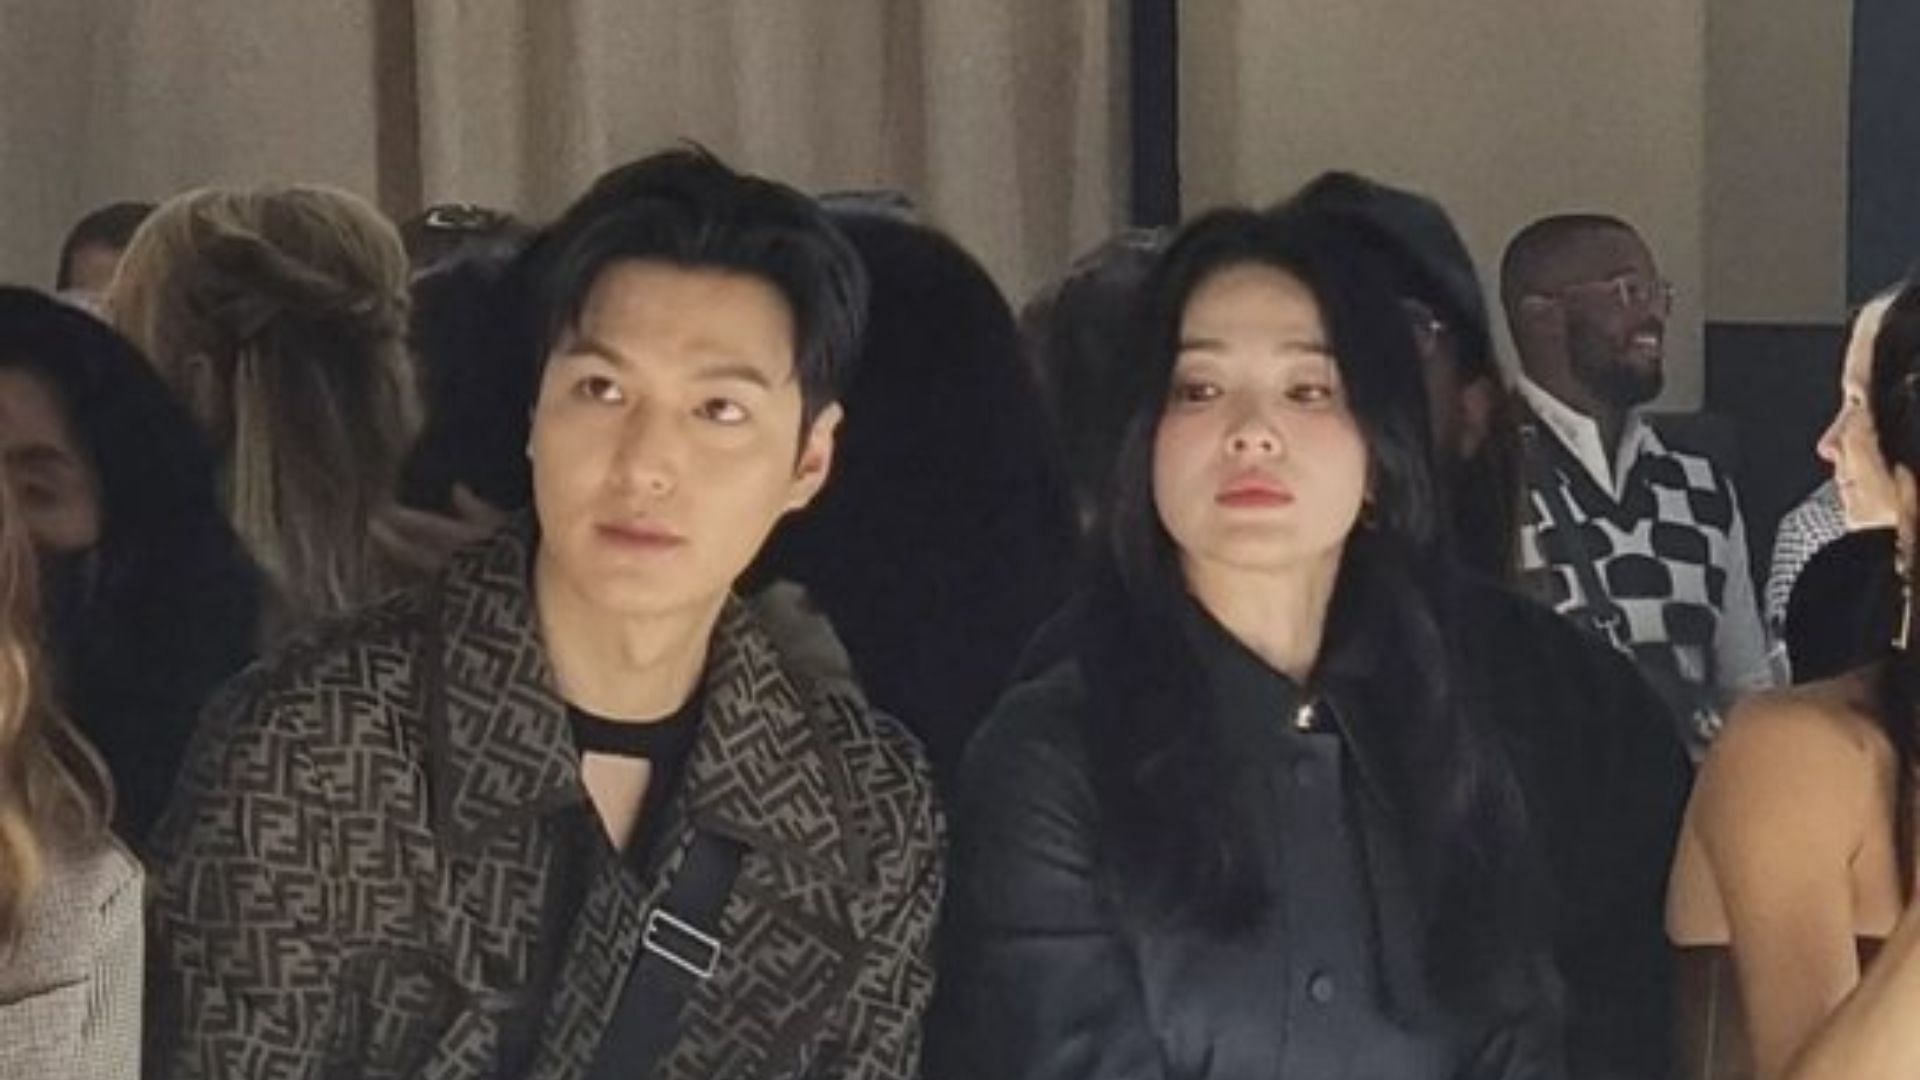 Lee Min-ho and Song Hye-kyo meet at Fendi event (Image via Twitter/@iconickdramas)